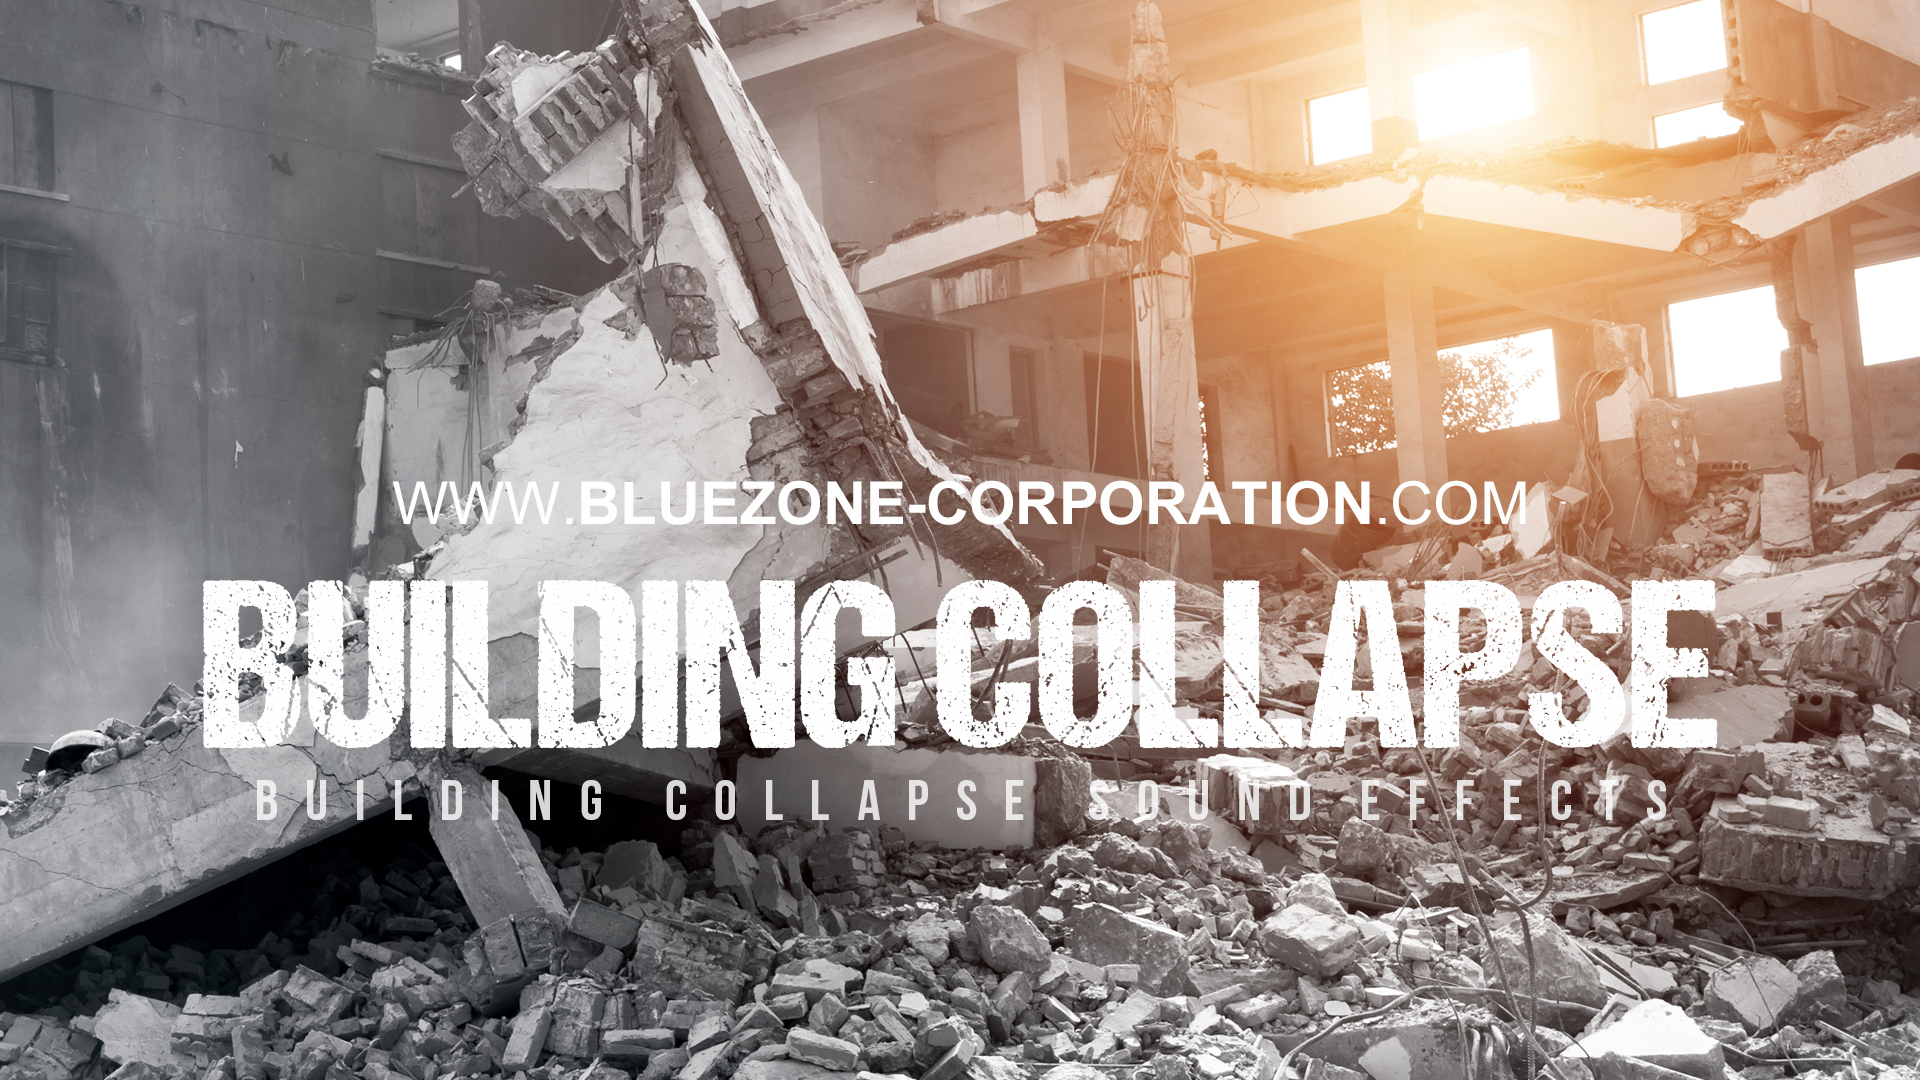 Bluezone releases 'Building Collapse Sound Effects'